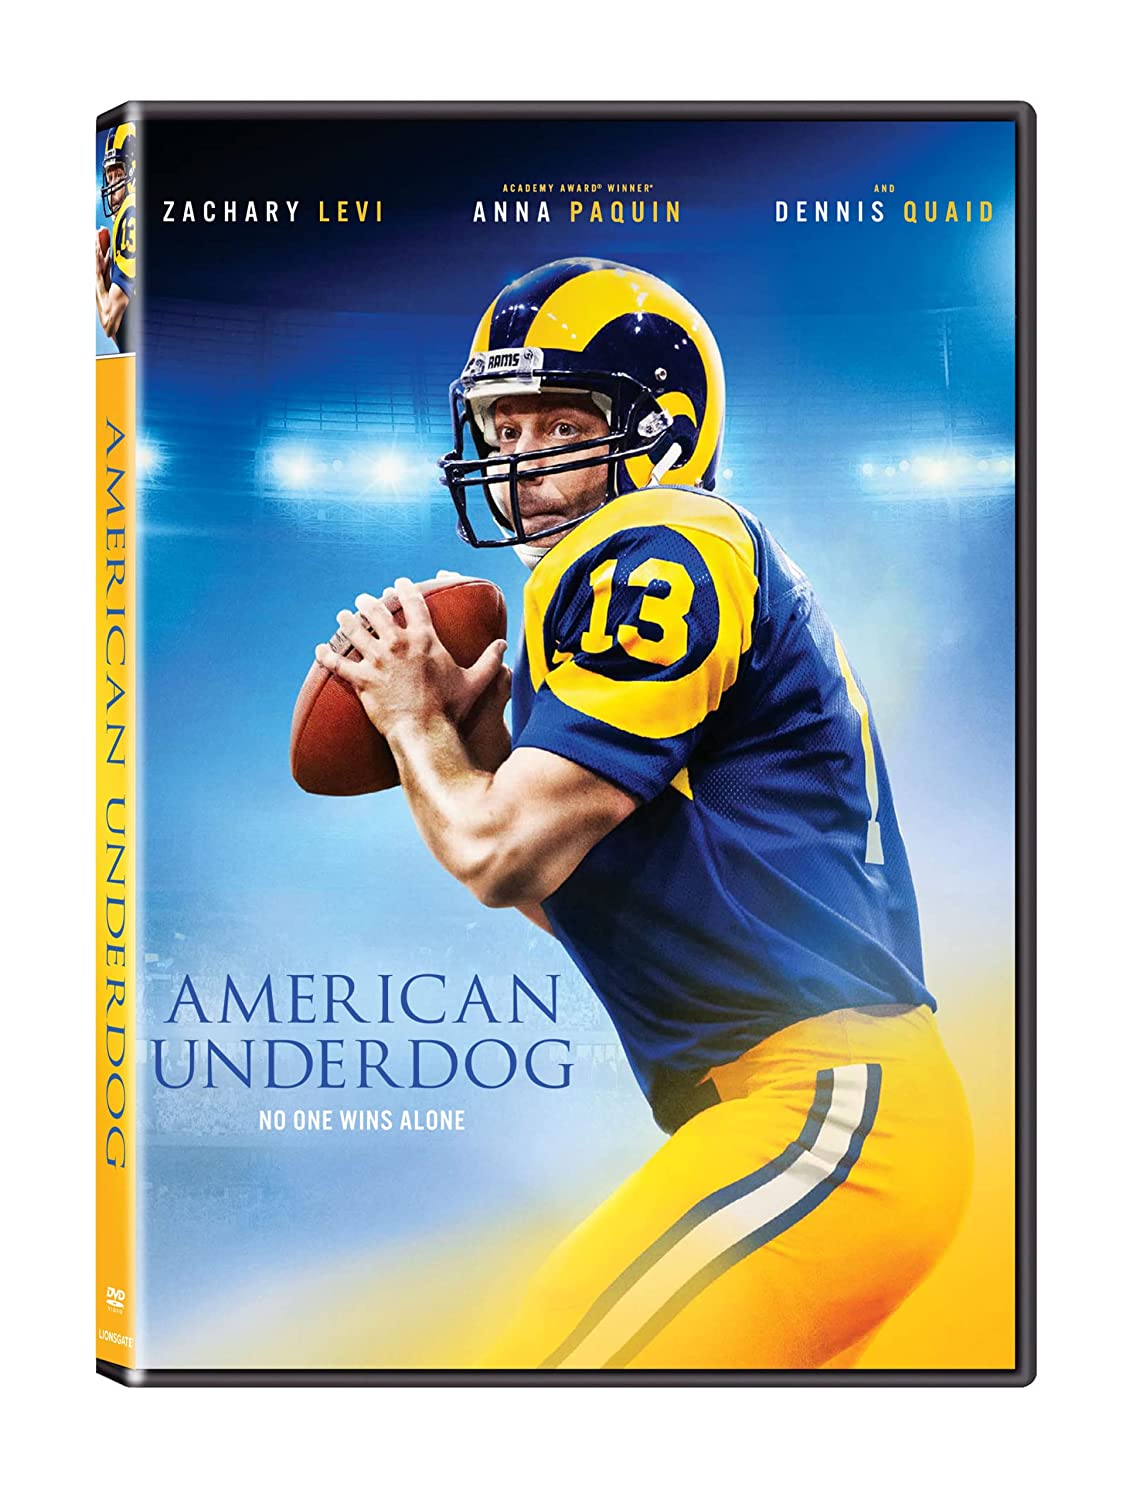 Image for "American Underdog"